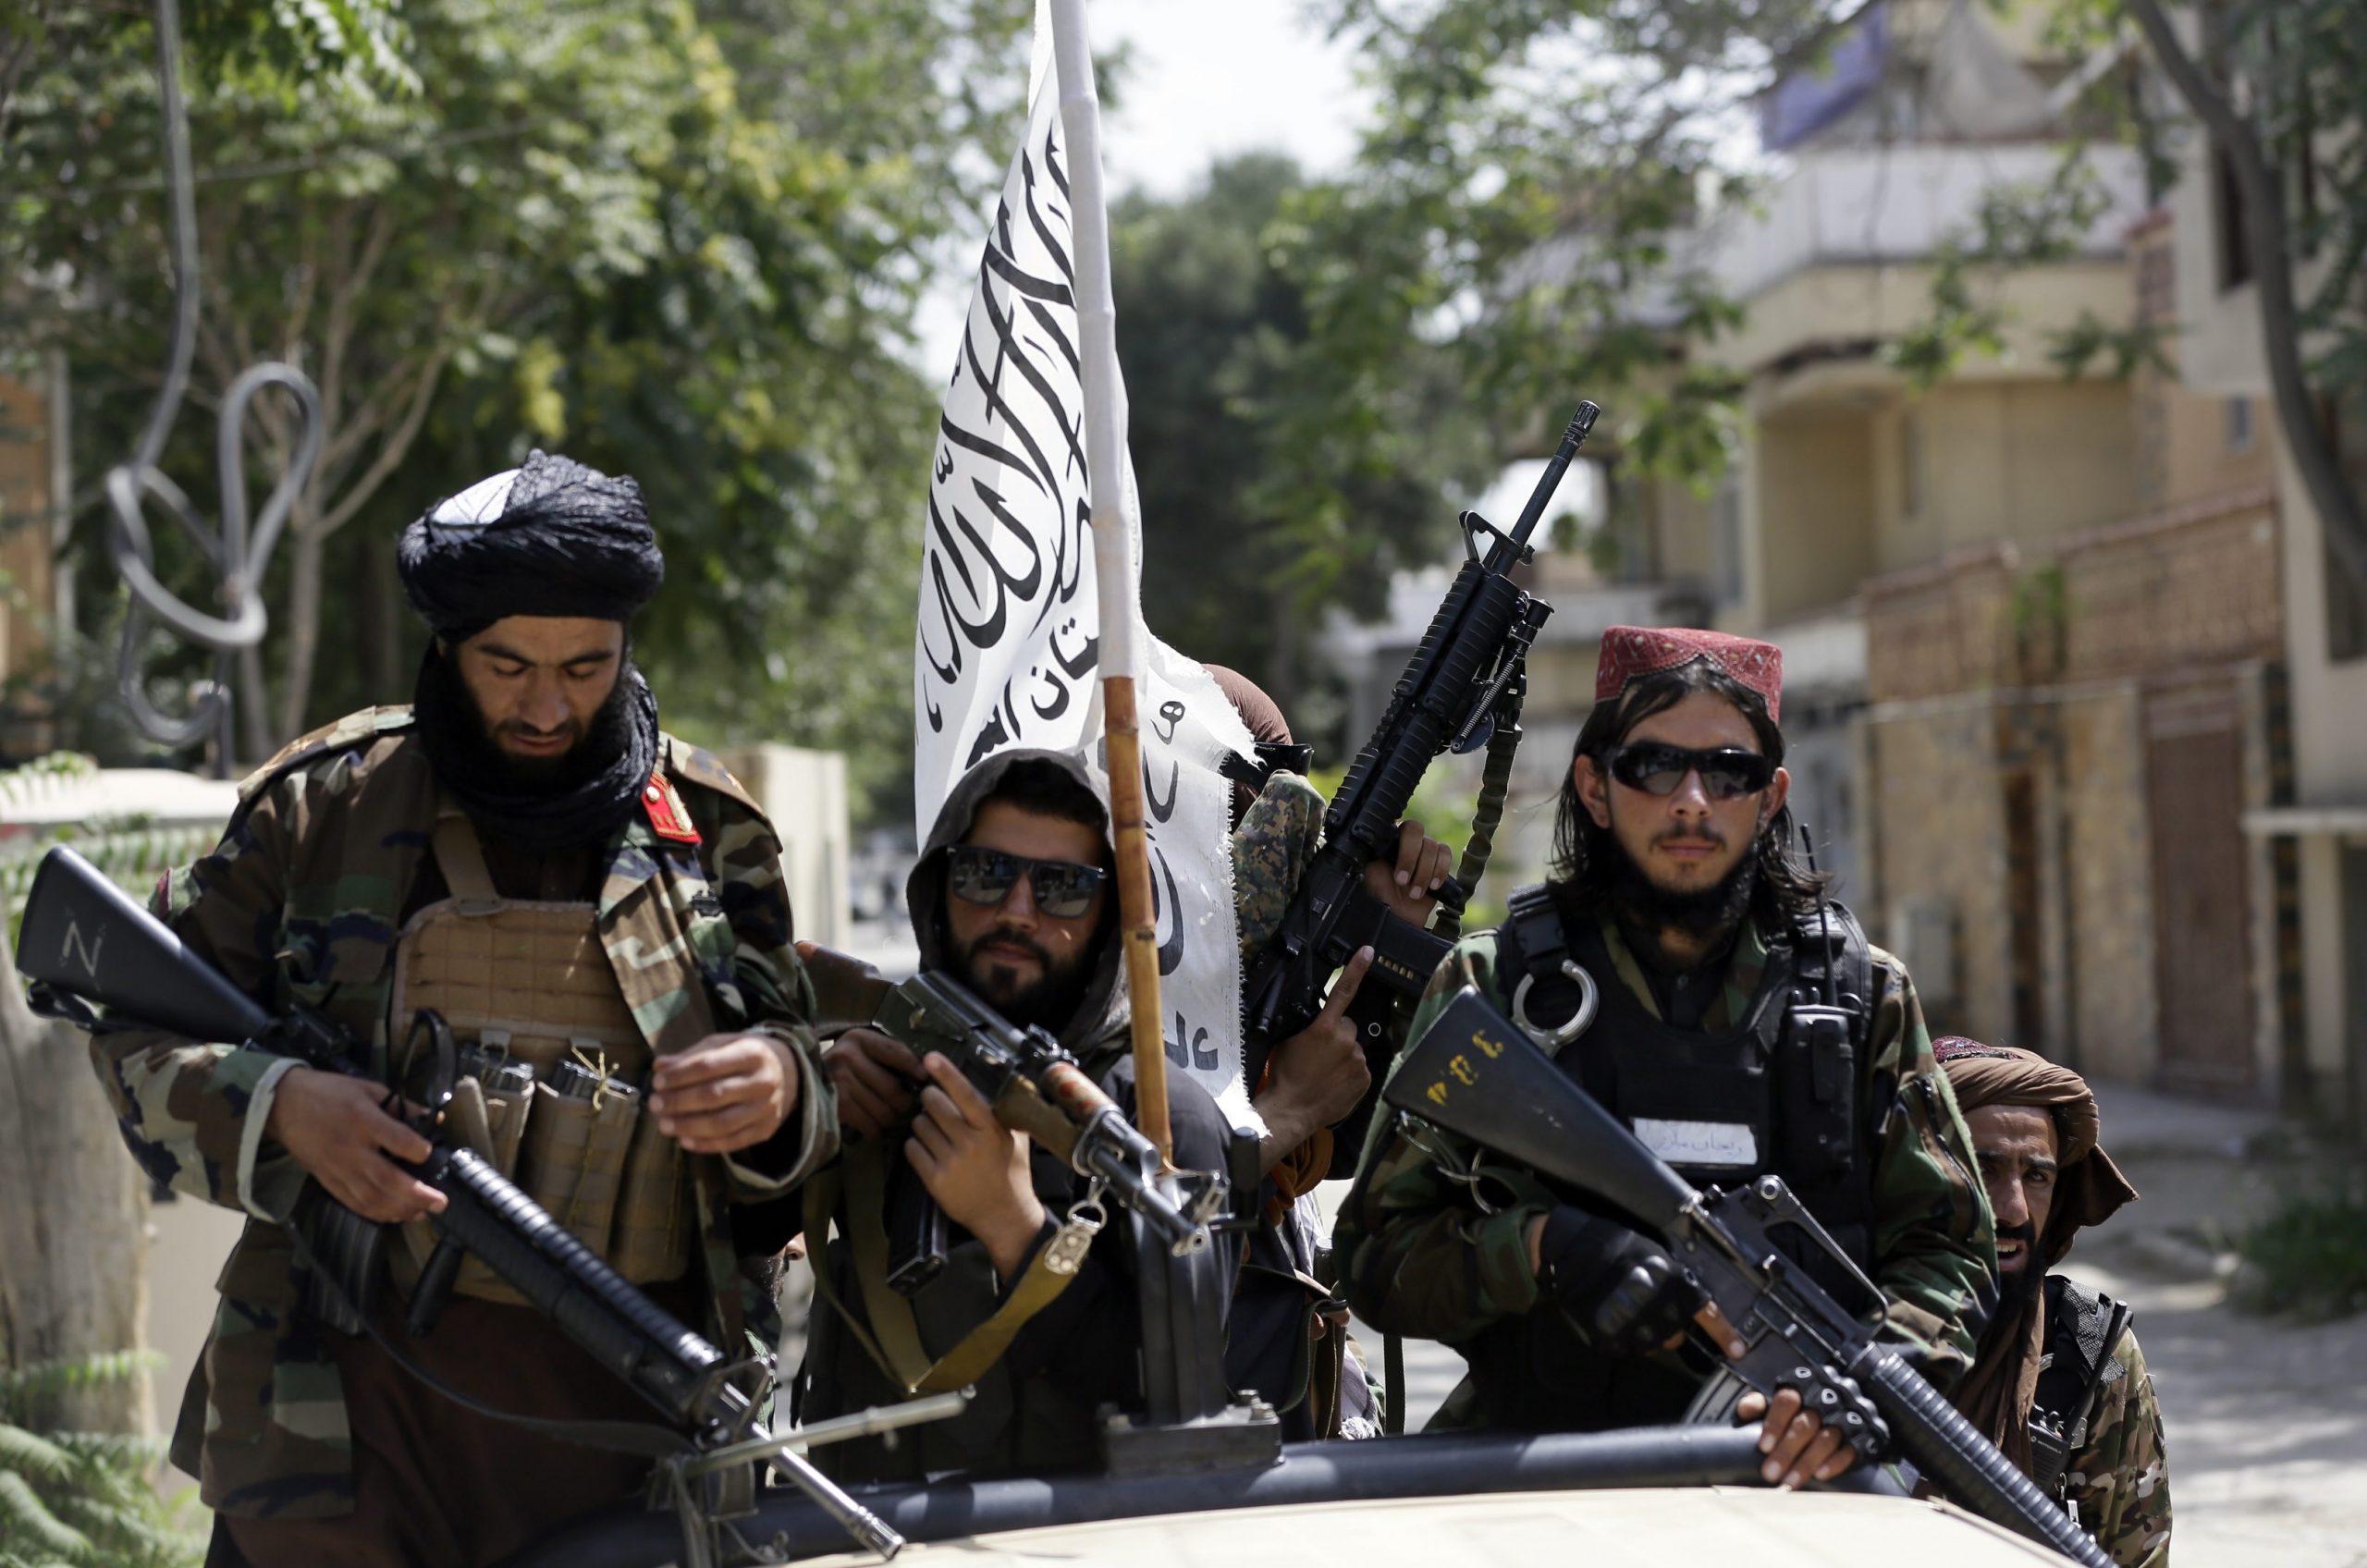 For al Qaeda, the Taliban’s victory is an epic triumph. For ISIS, it is not a triumph  